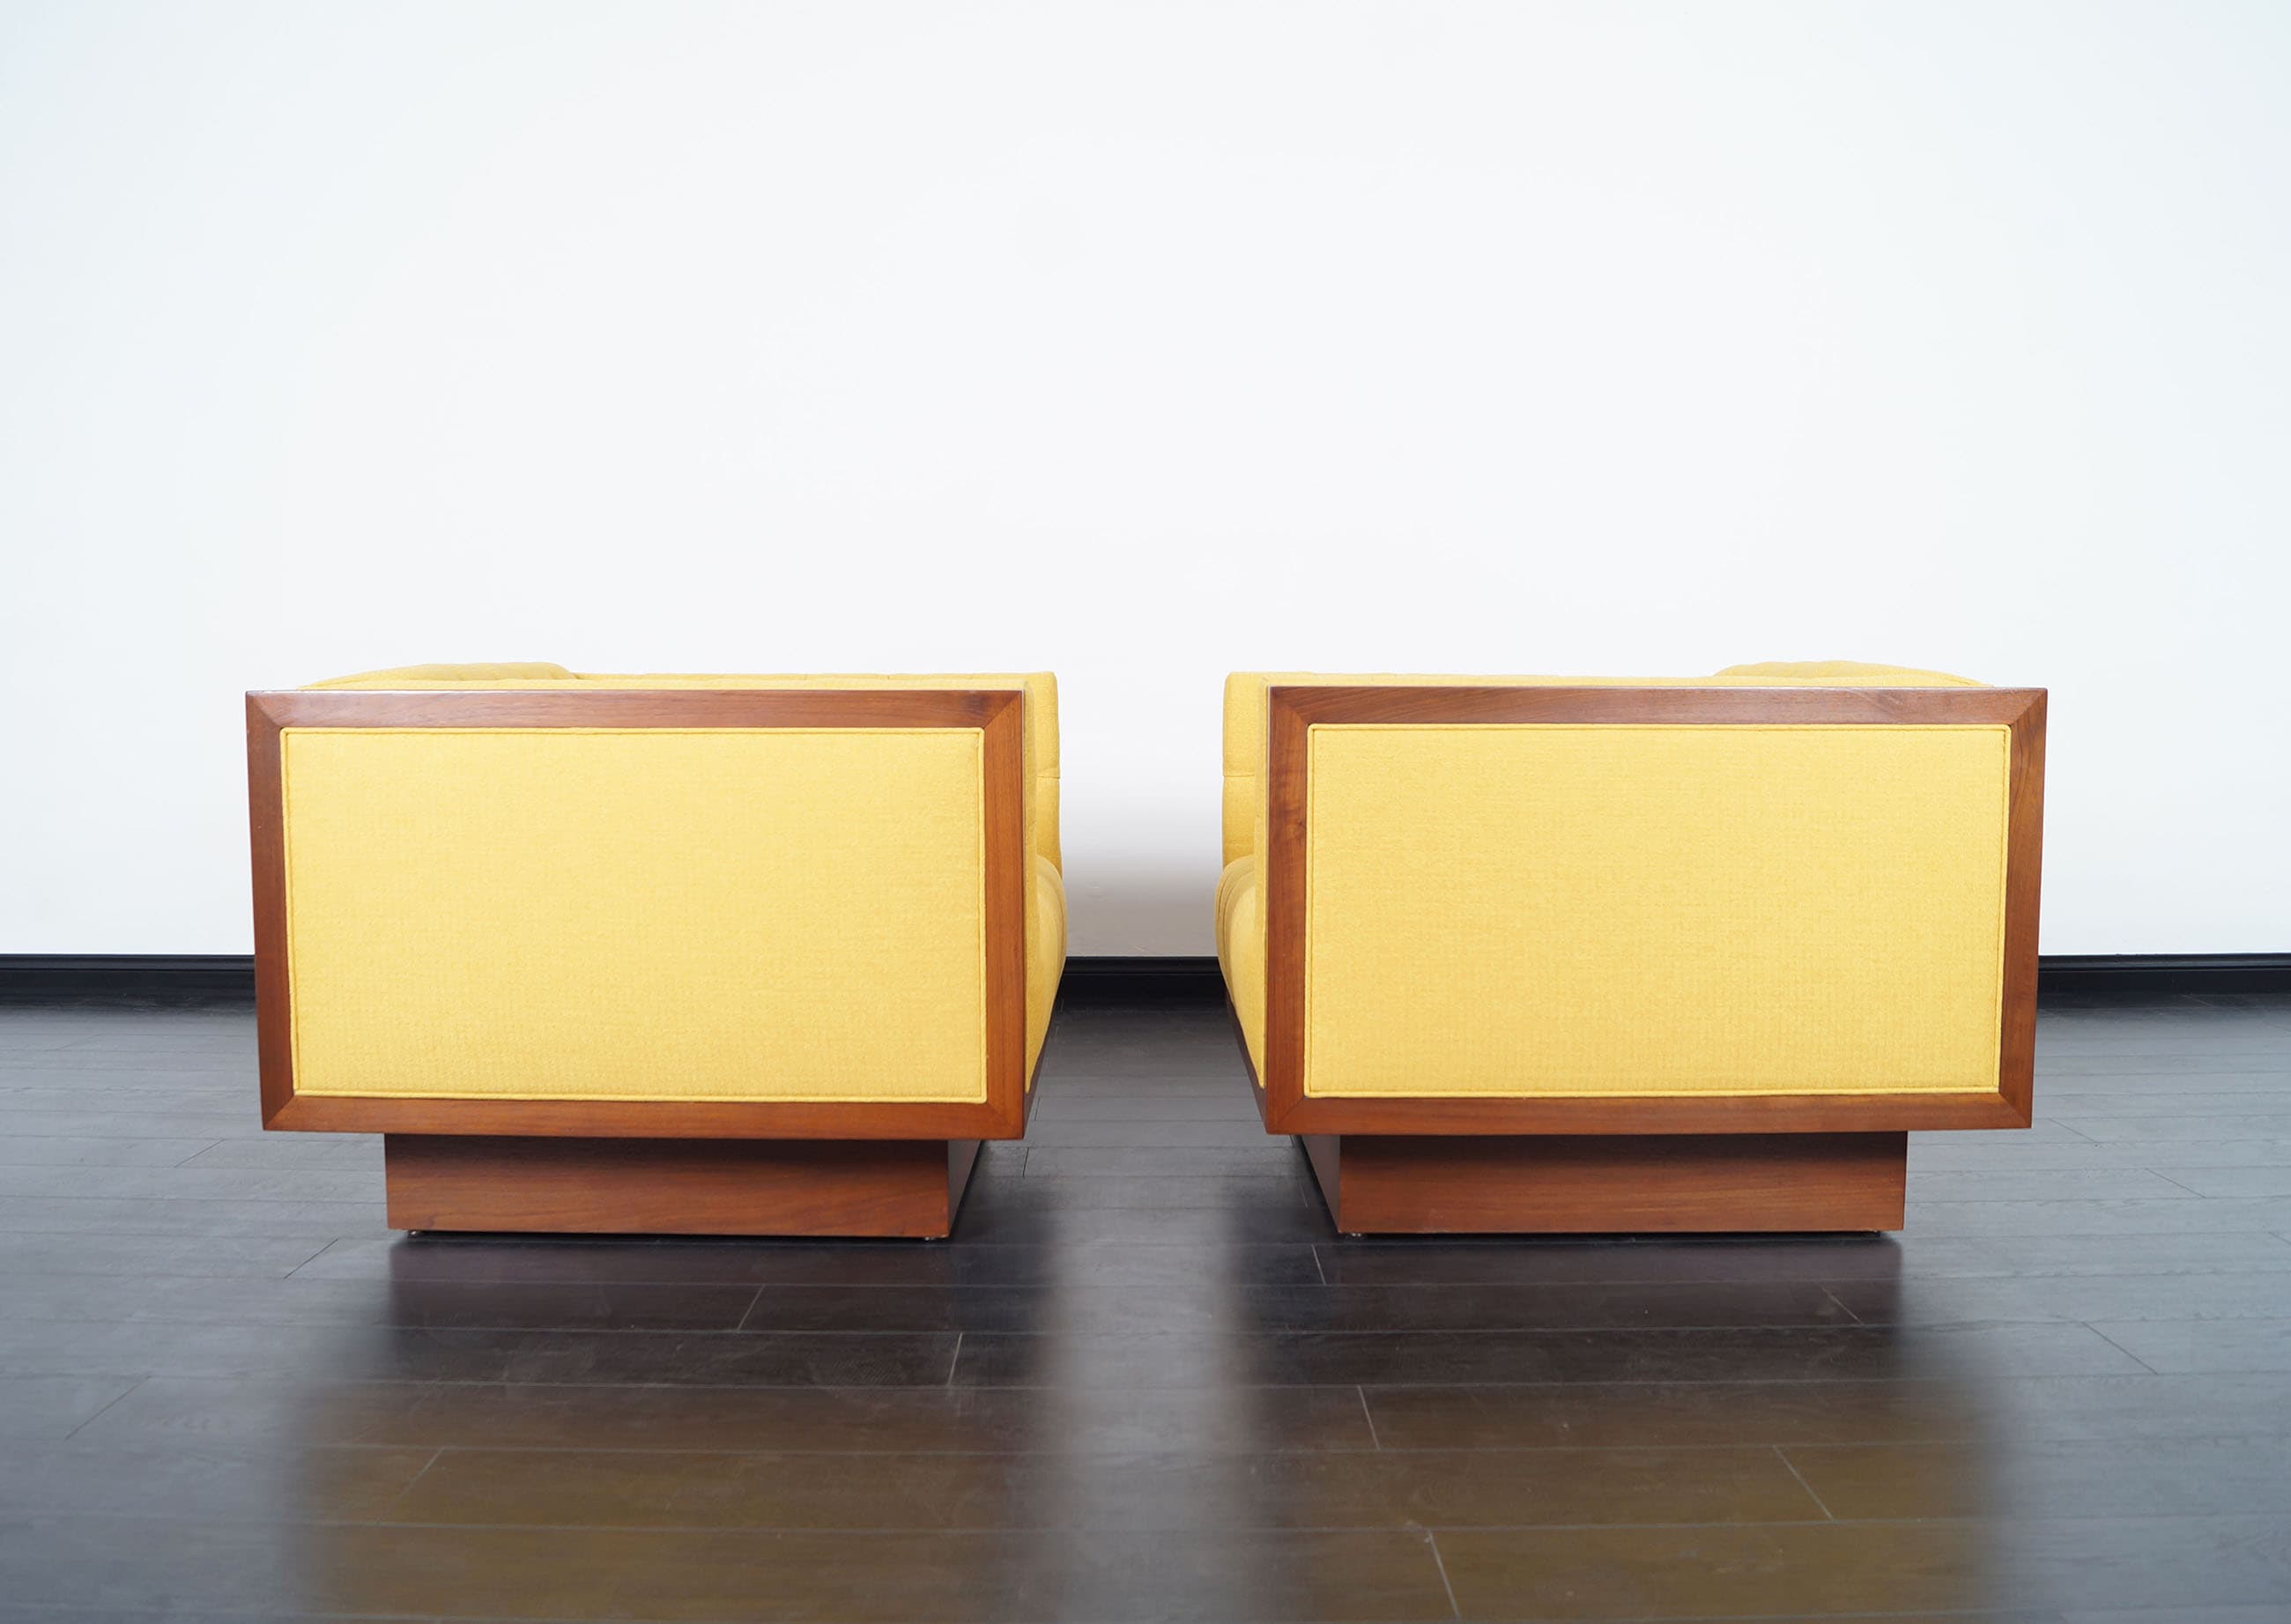 Vintage Tufted Lounge Chairs by Milo Baughman